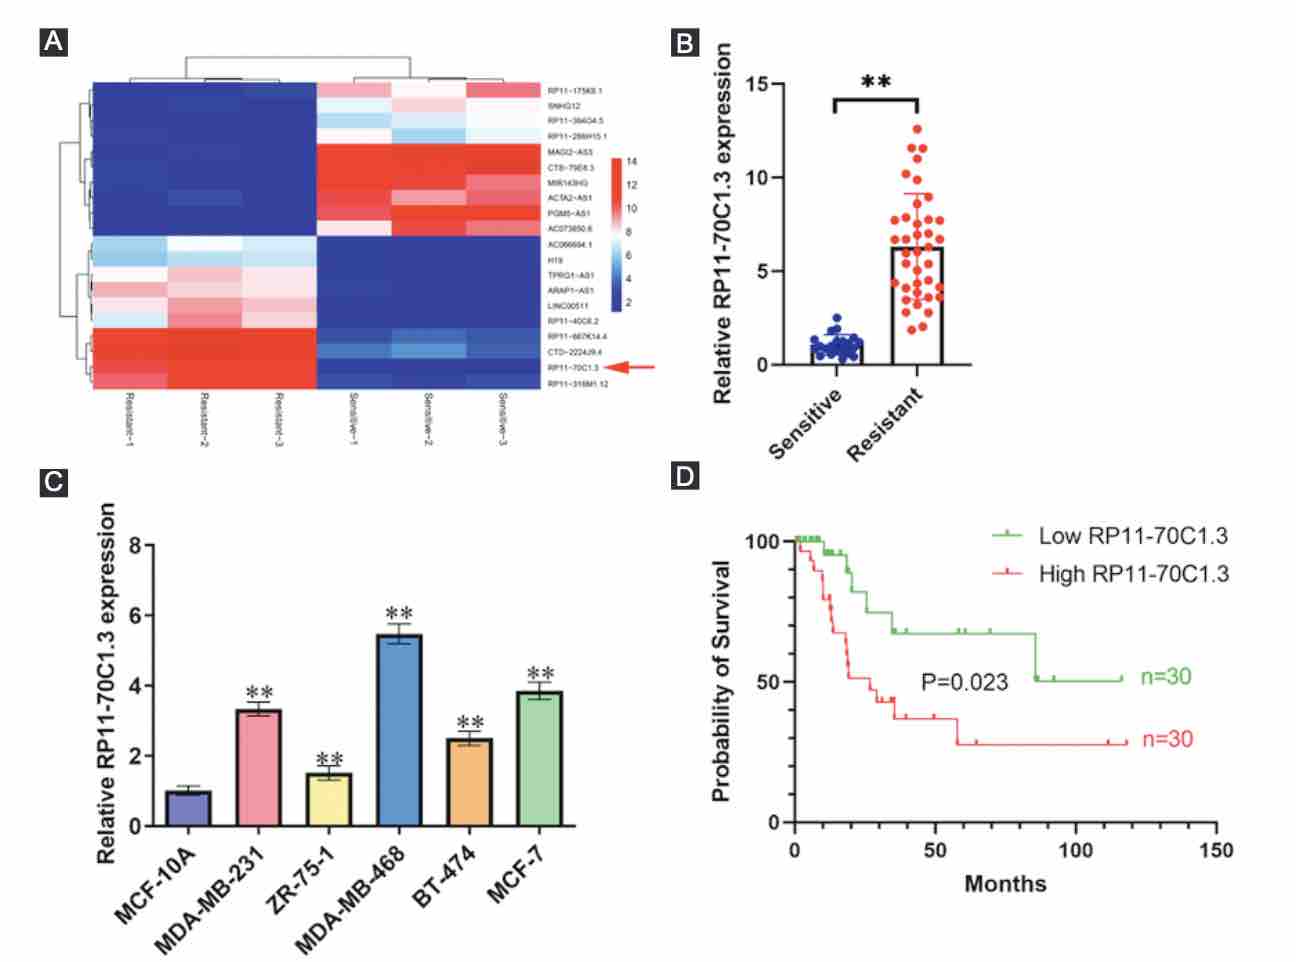 Long noncoding RNA RP11-70C1.3 confers chemoresistance of breast cancer cells through miR-6736-3p/NRP-1 axis